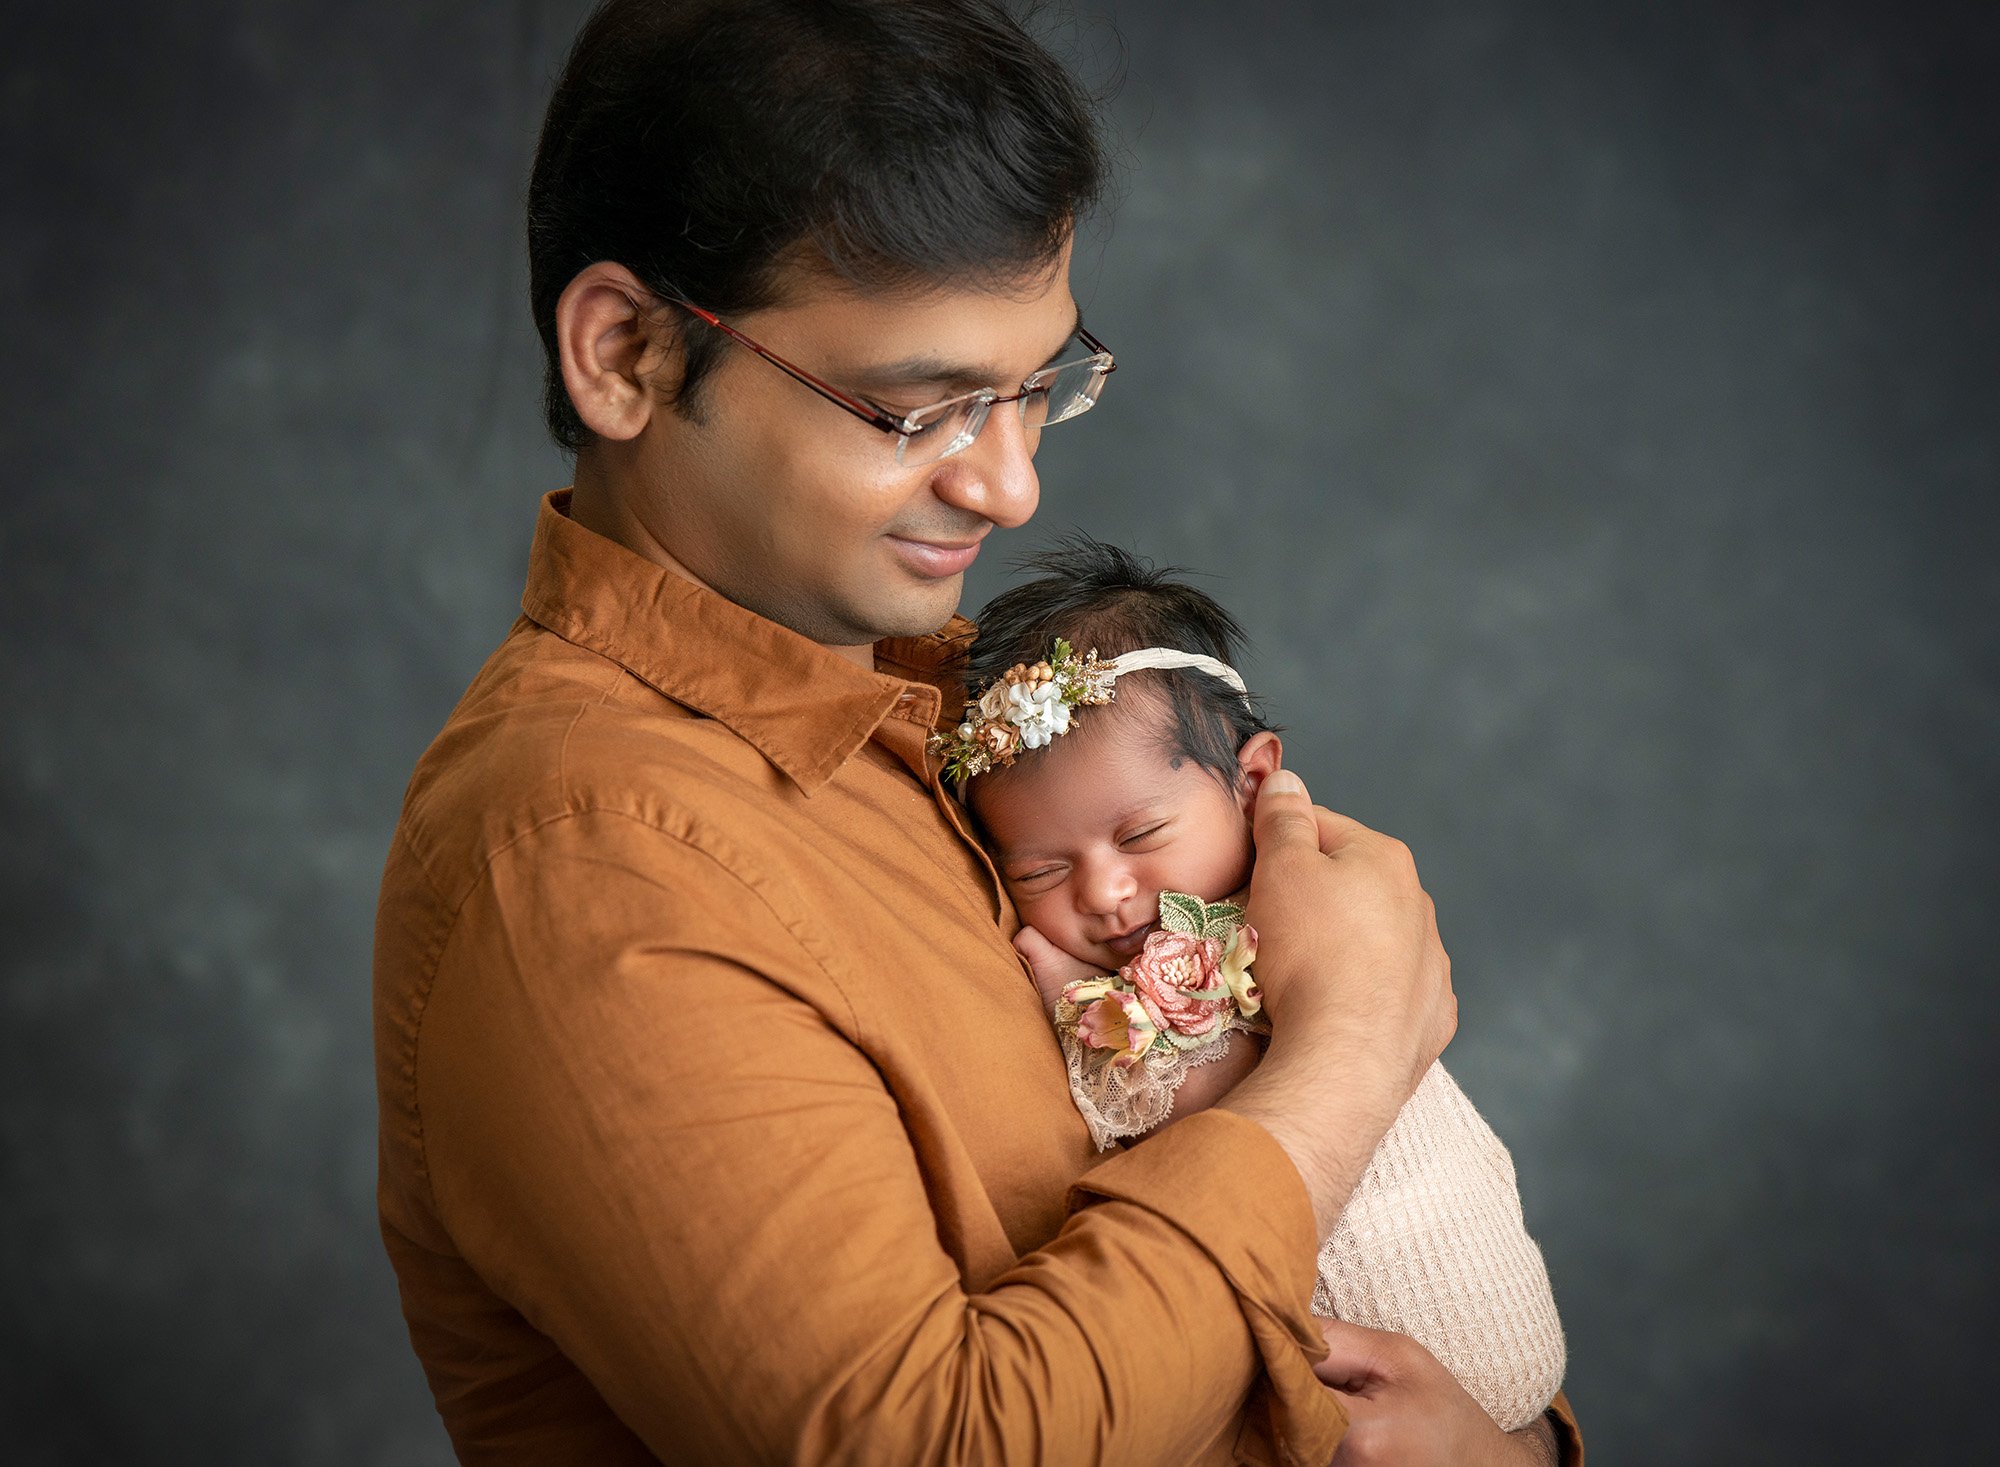 new father cradling newborn baby girl close to his chest